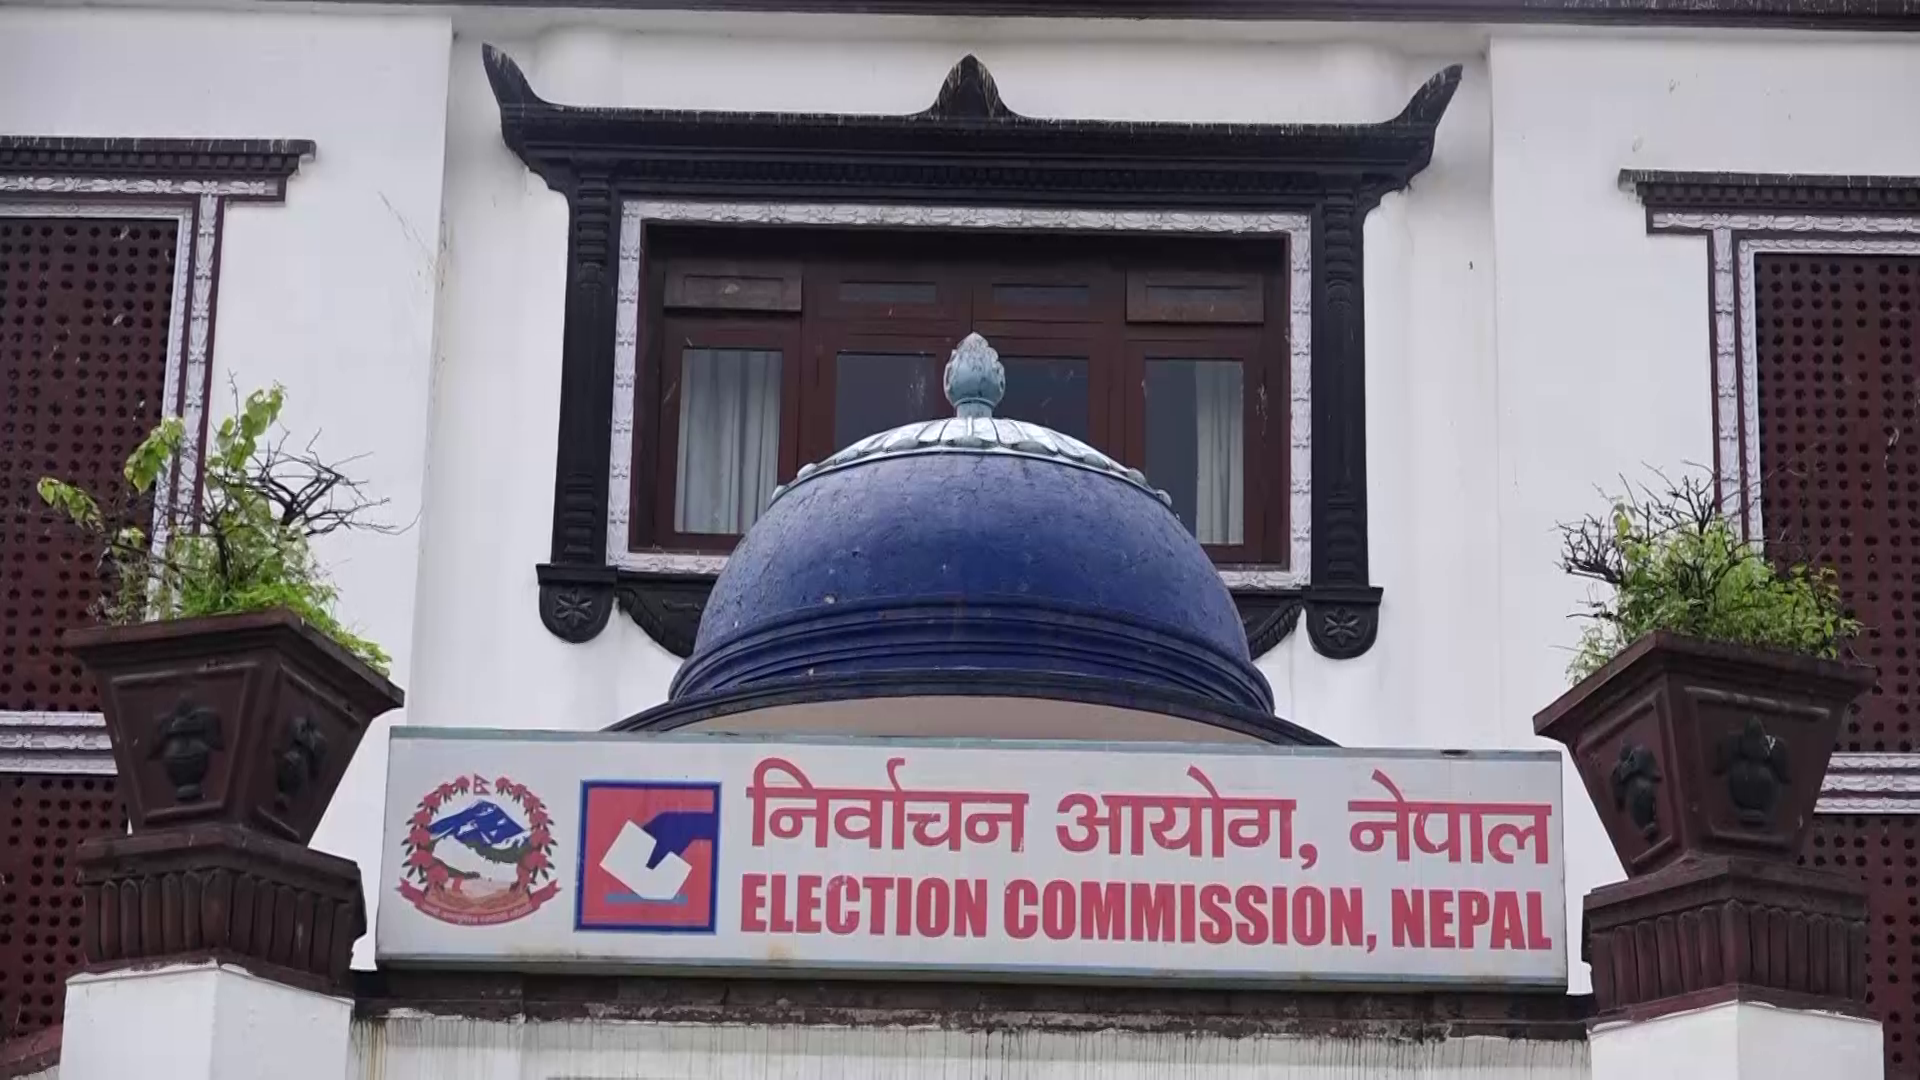 5,251 queries registered in EC call center in past 30 days